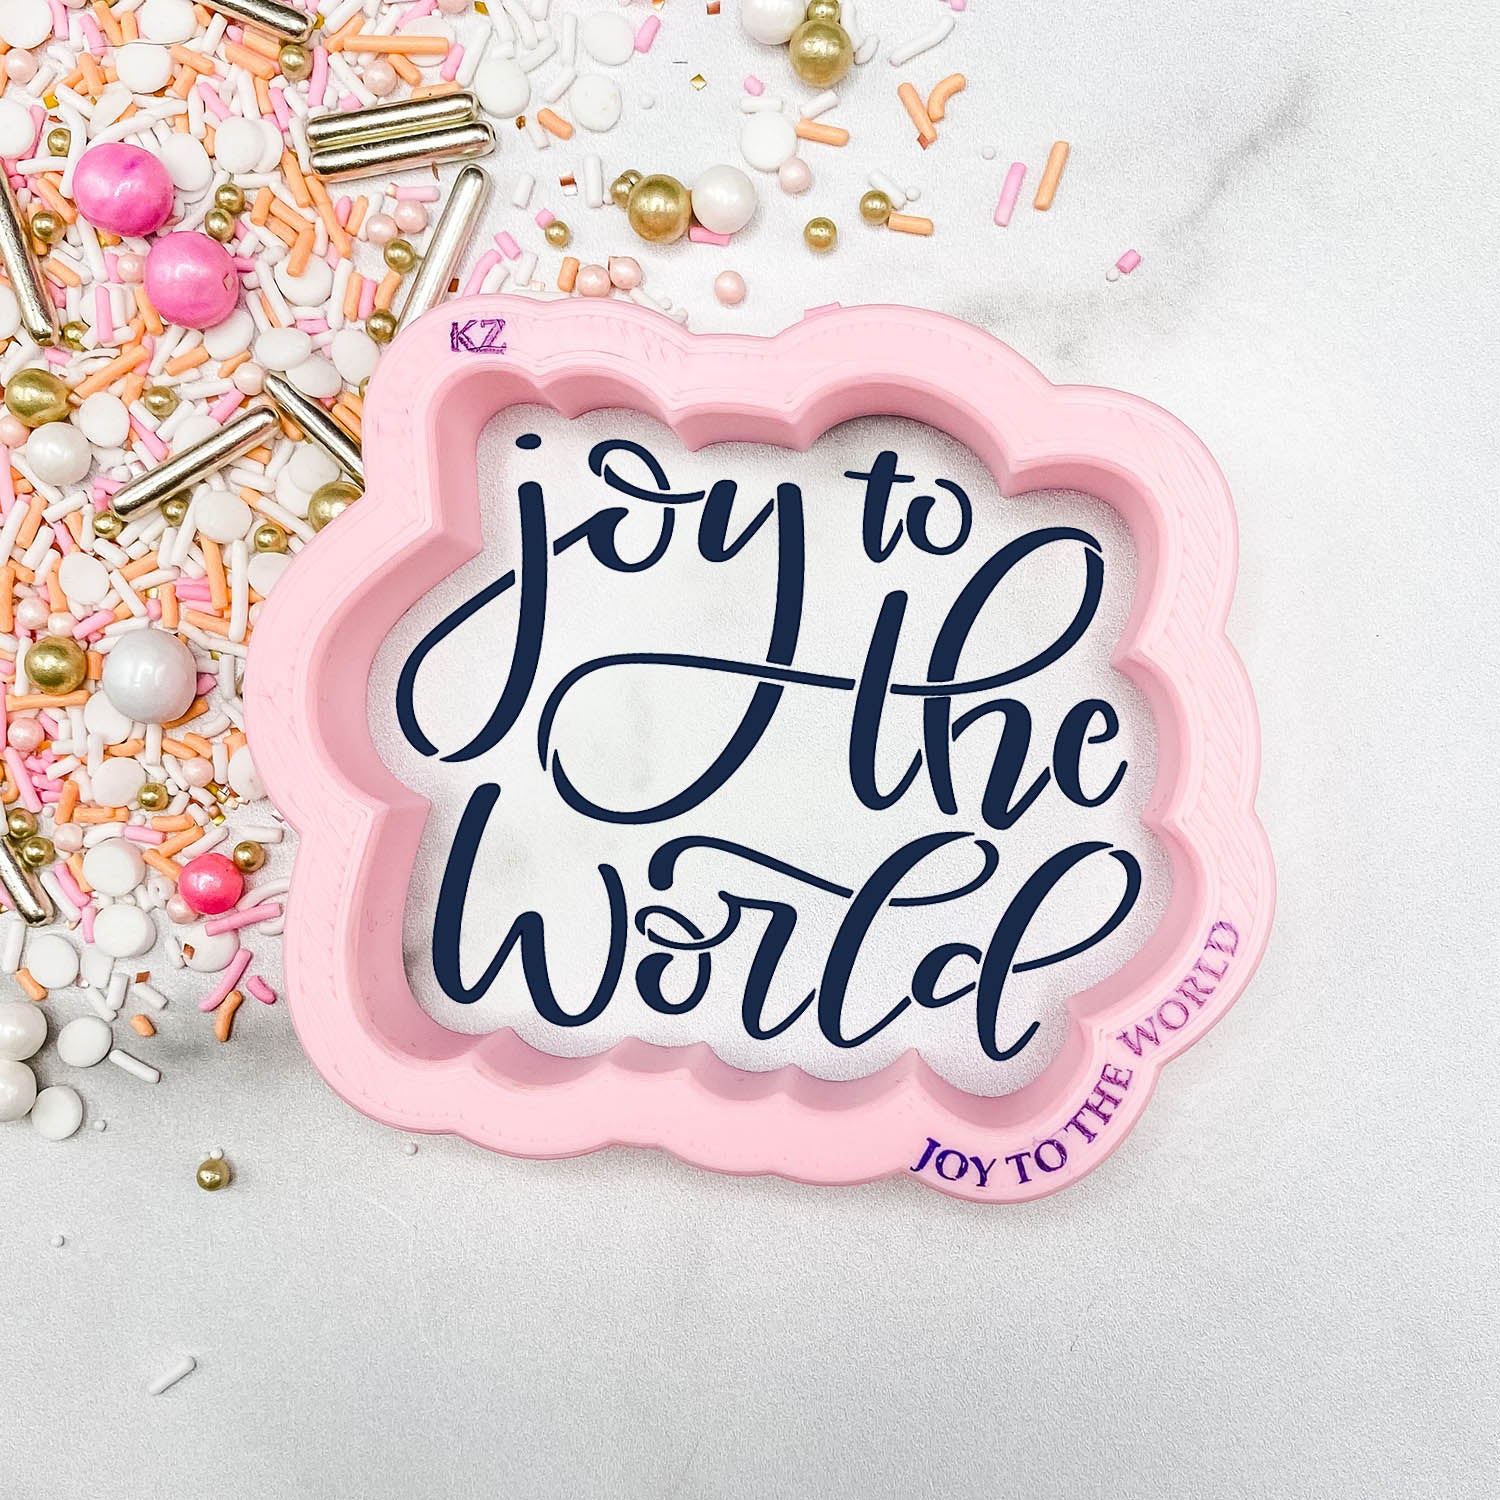 Joy to the World Hand Lettered